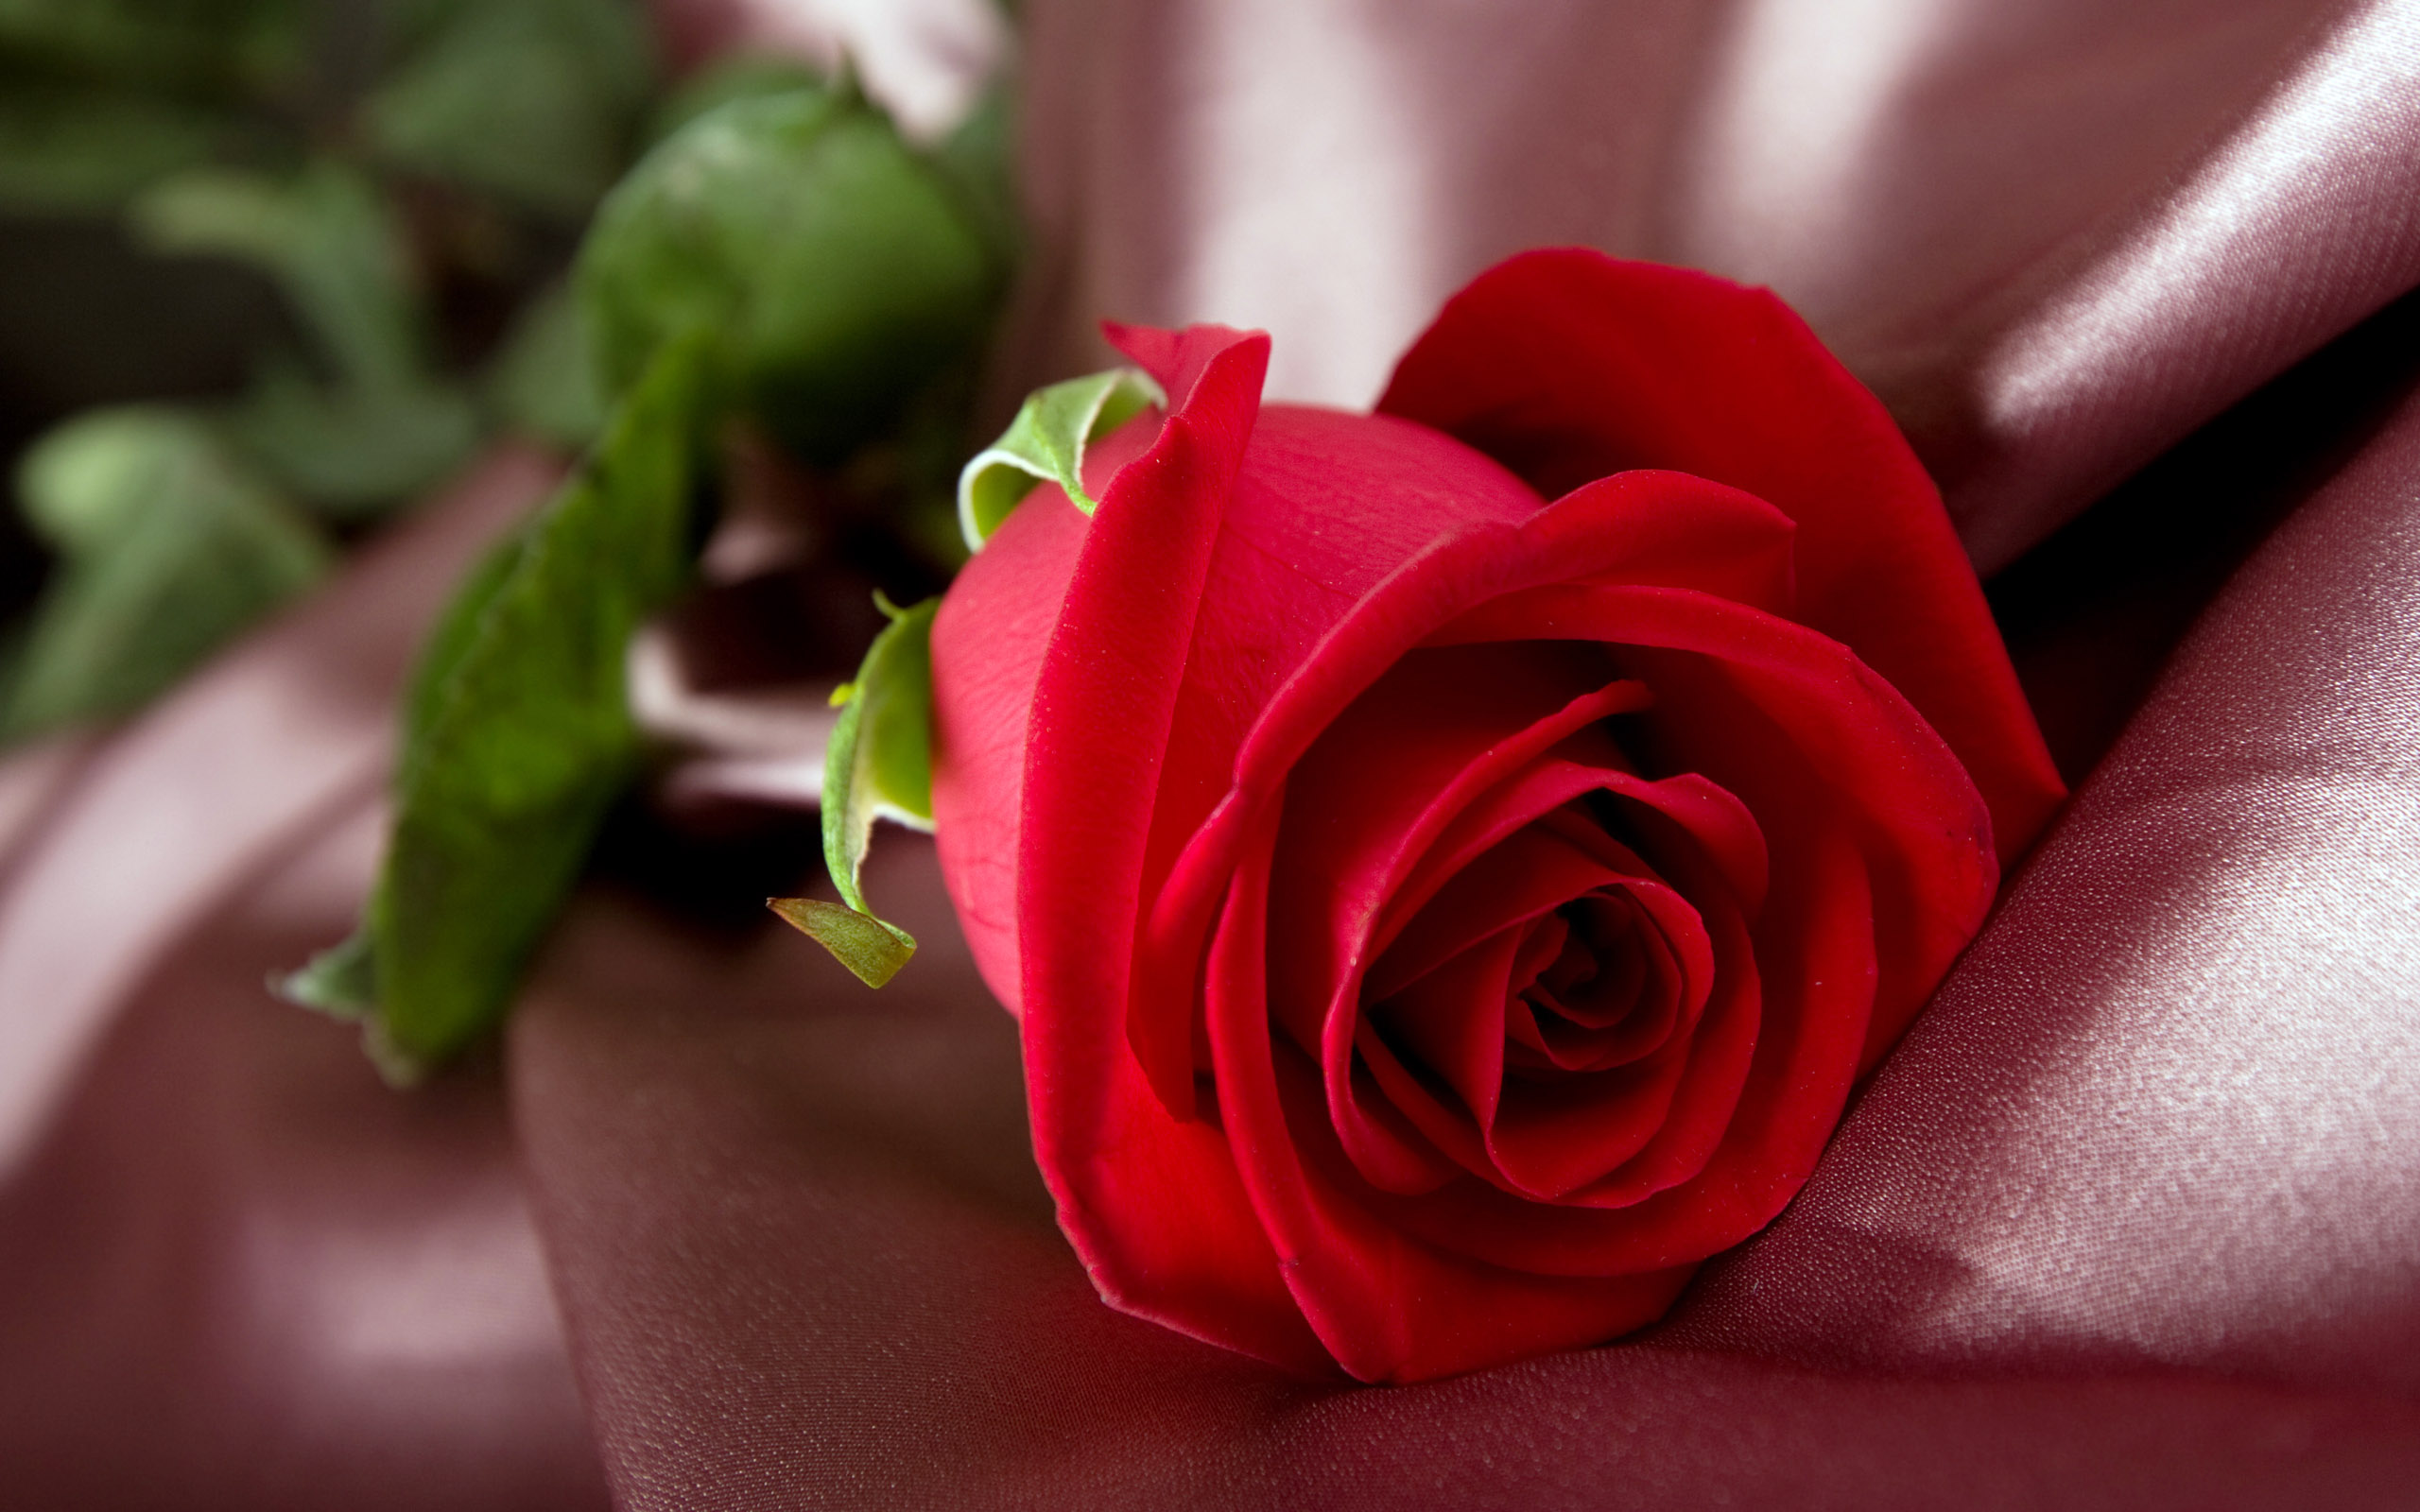 Awesome Red Rose Flower Macro Wallpaper HD